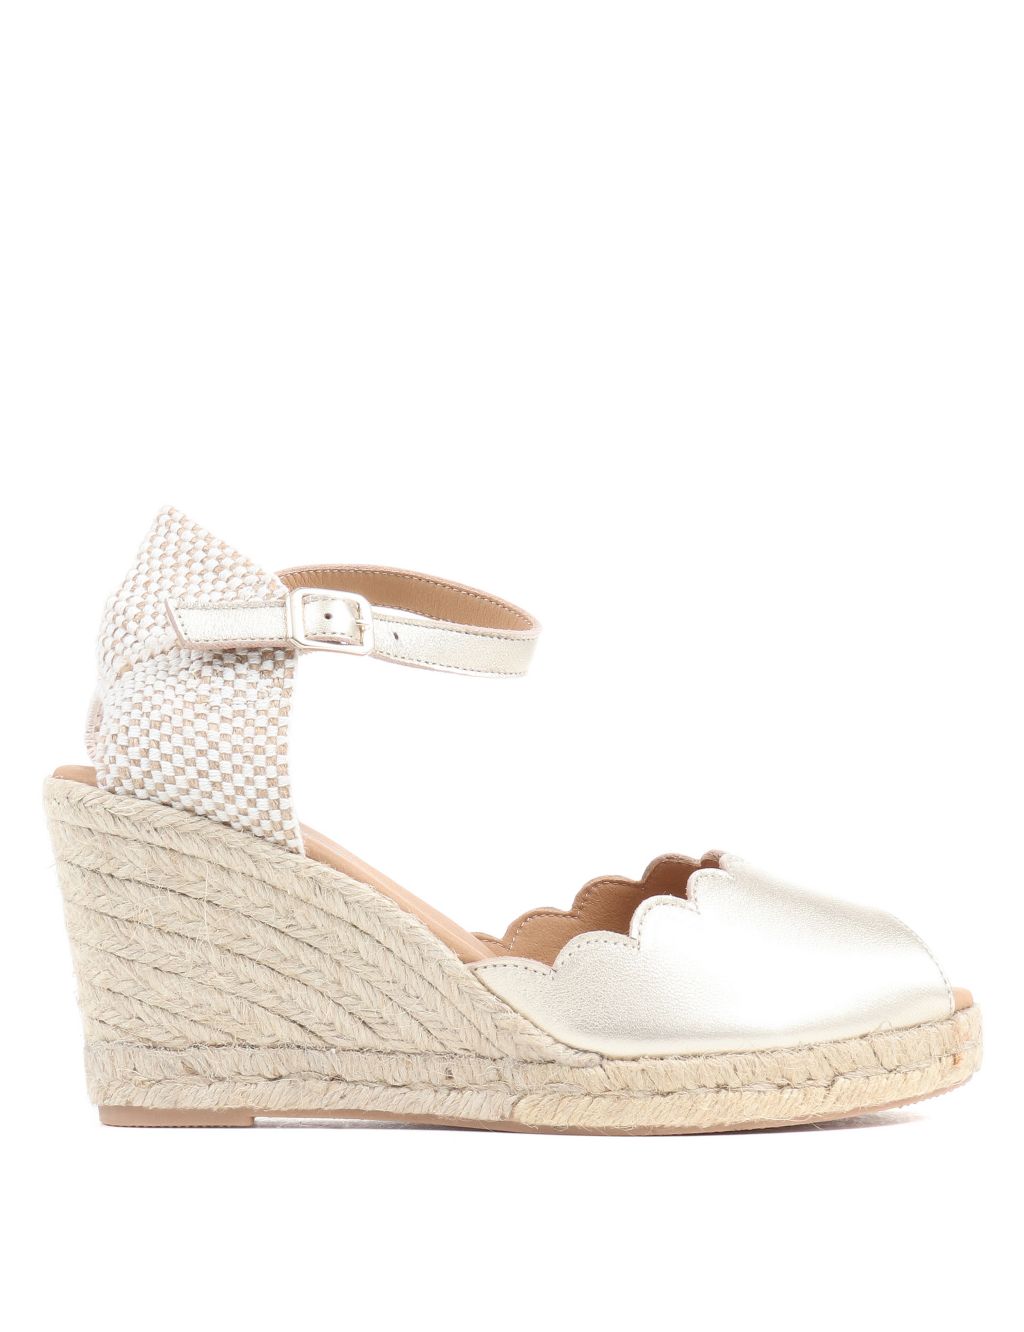 Leather Ankle Strap Wedge Espadrilles image 5